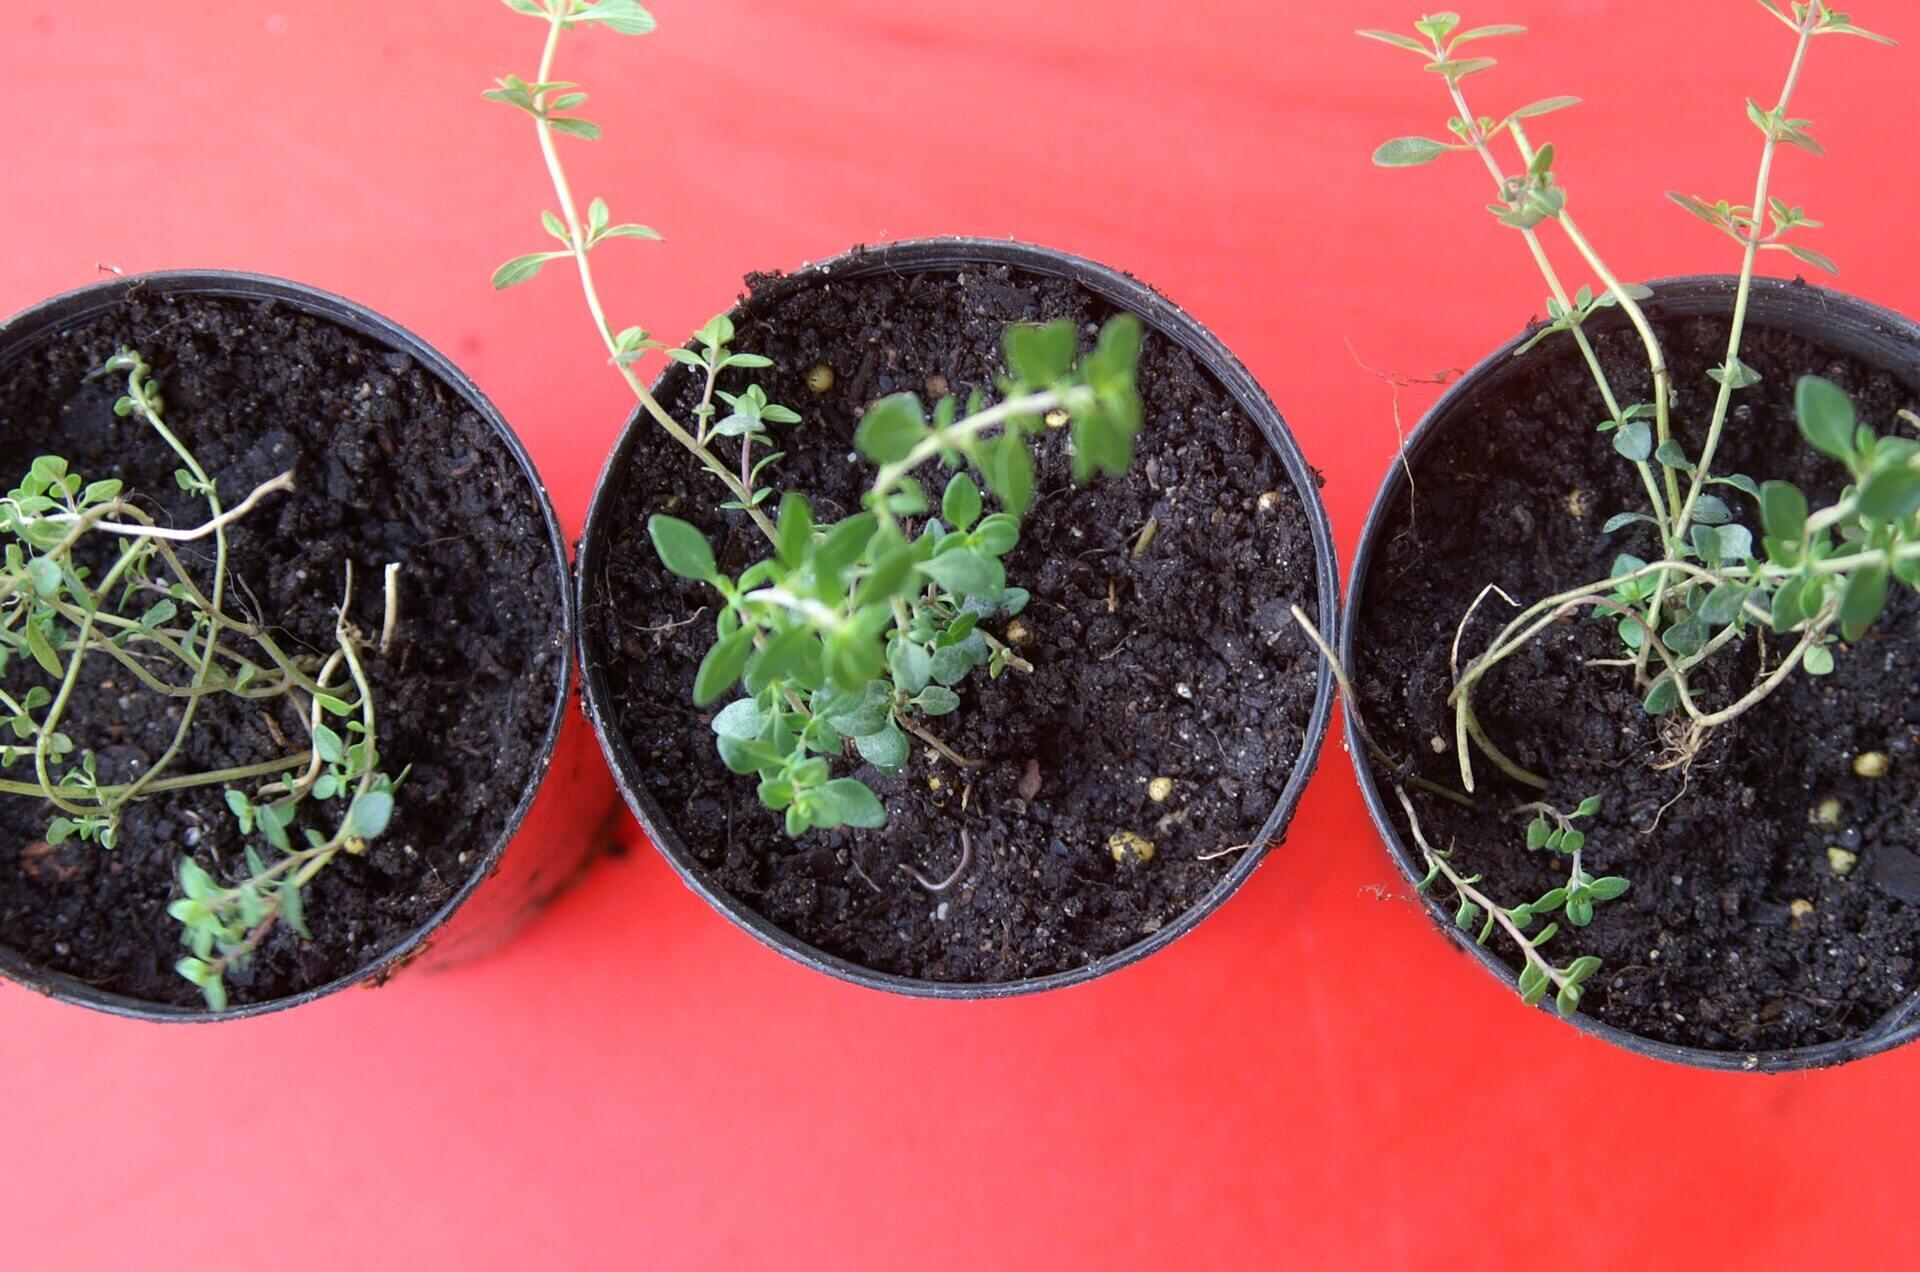 How To Plant Thyme From Cuttings